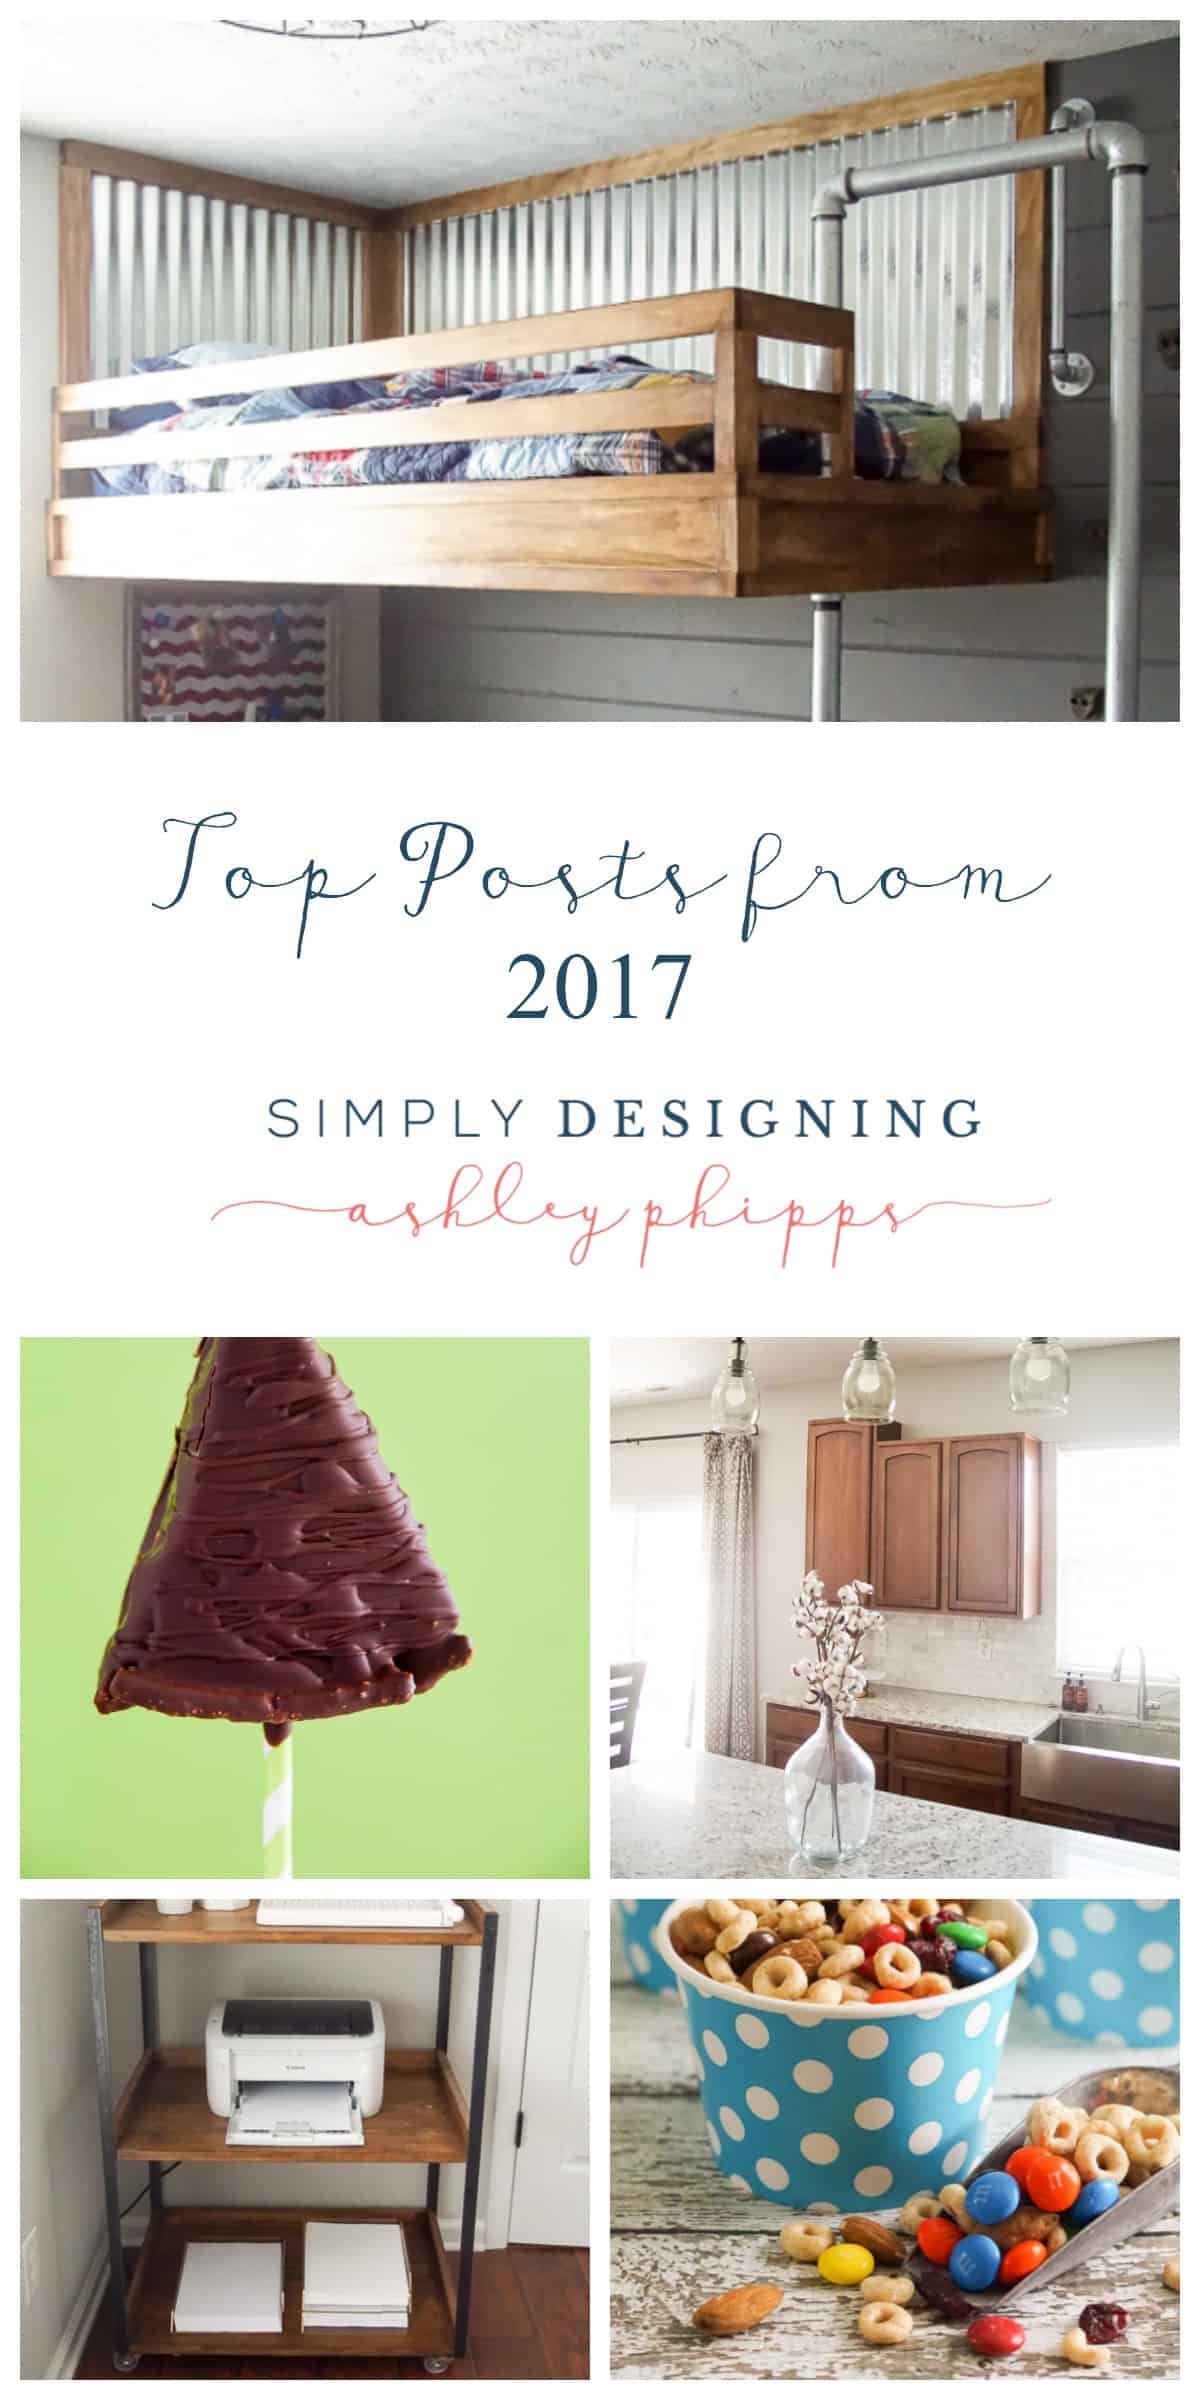 Ashley Top Posts 1 Long Pin The Year's Best Farmhouse Decor and Easy Scrumptious Recipes 2